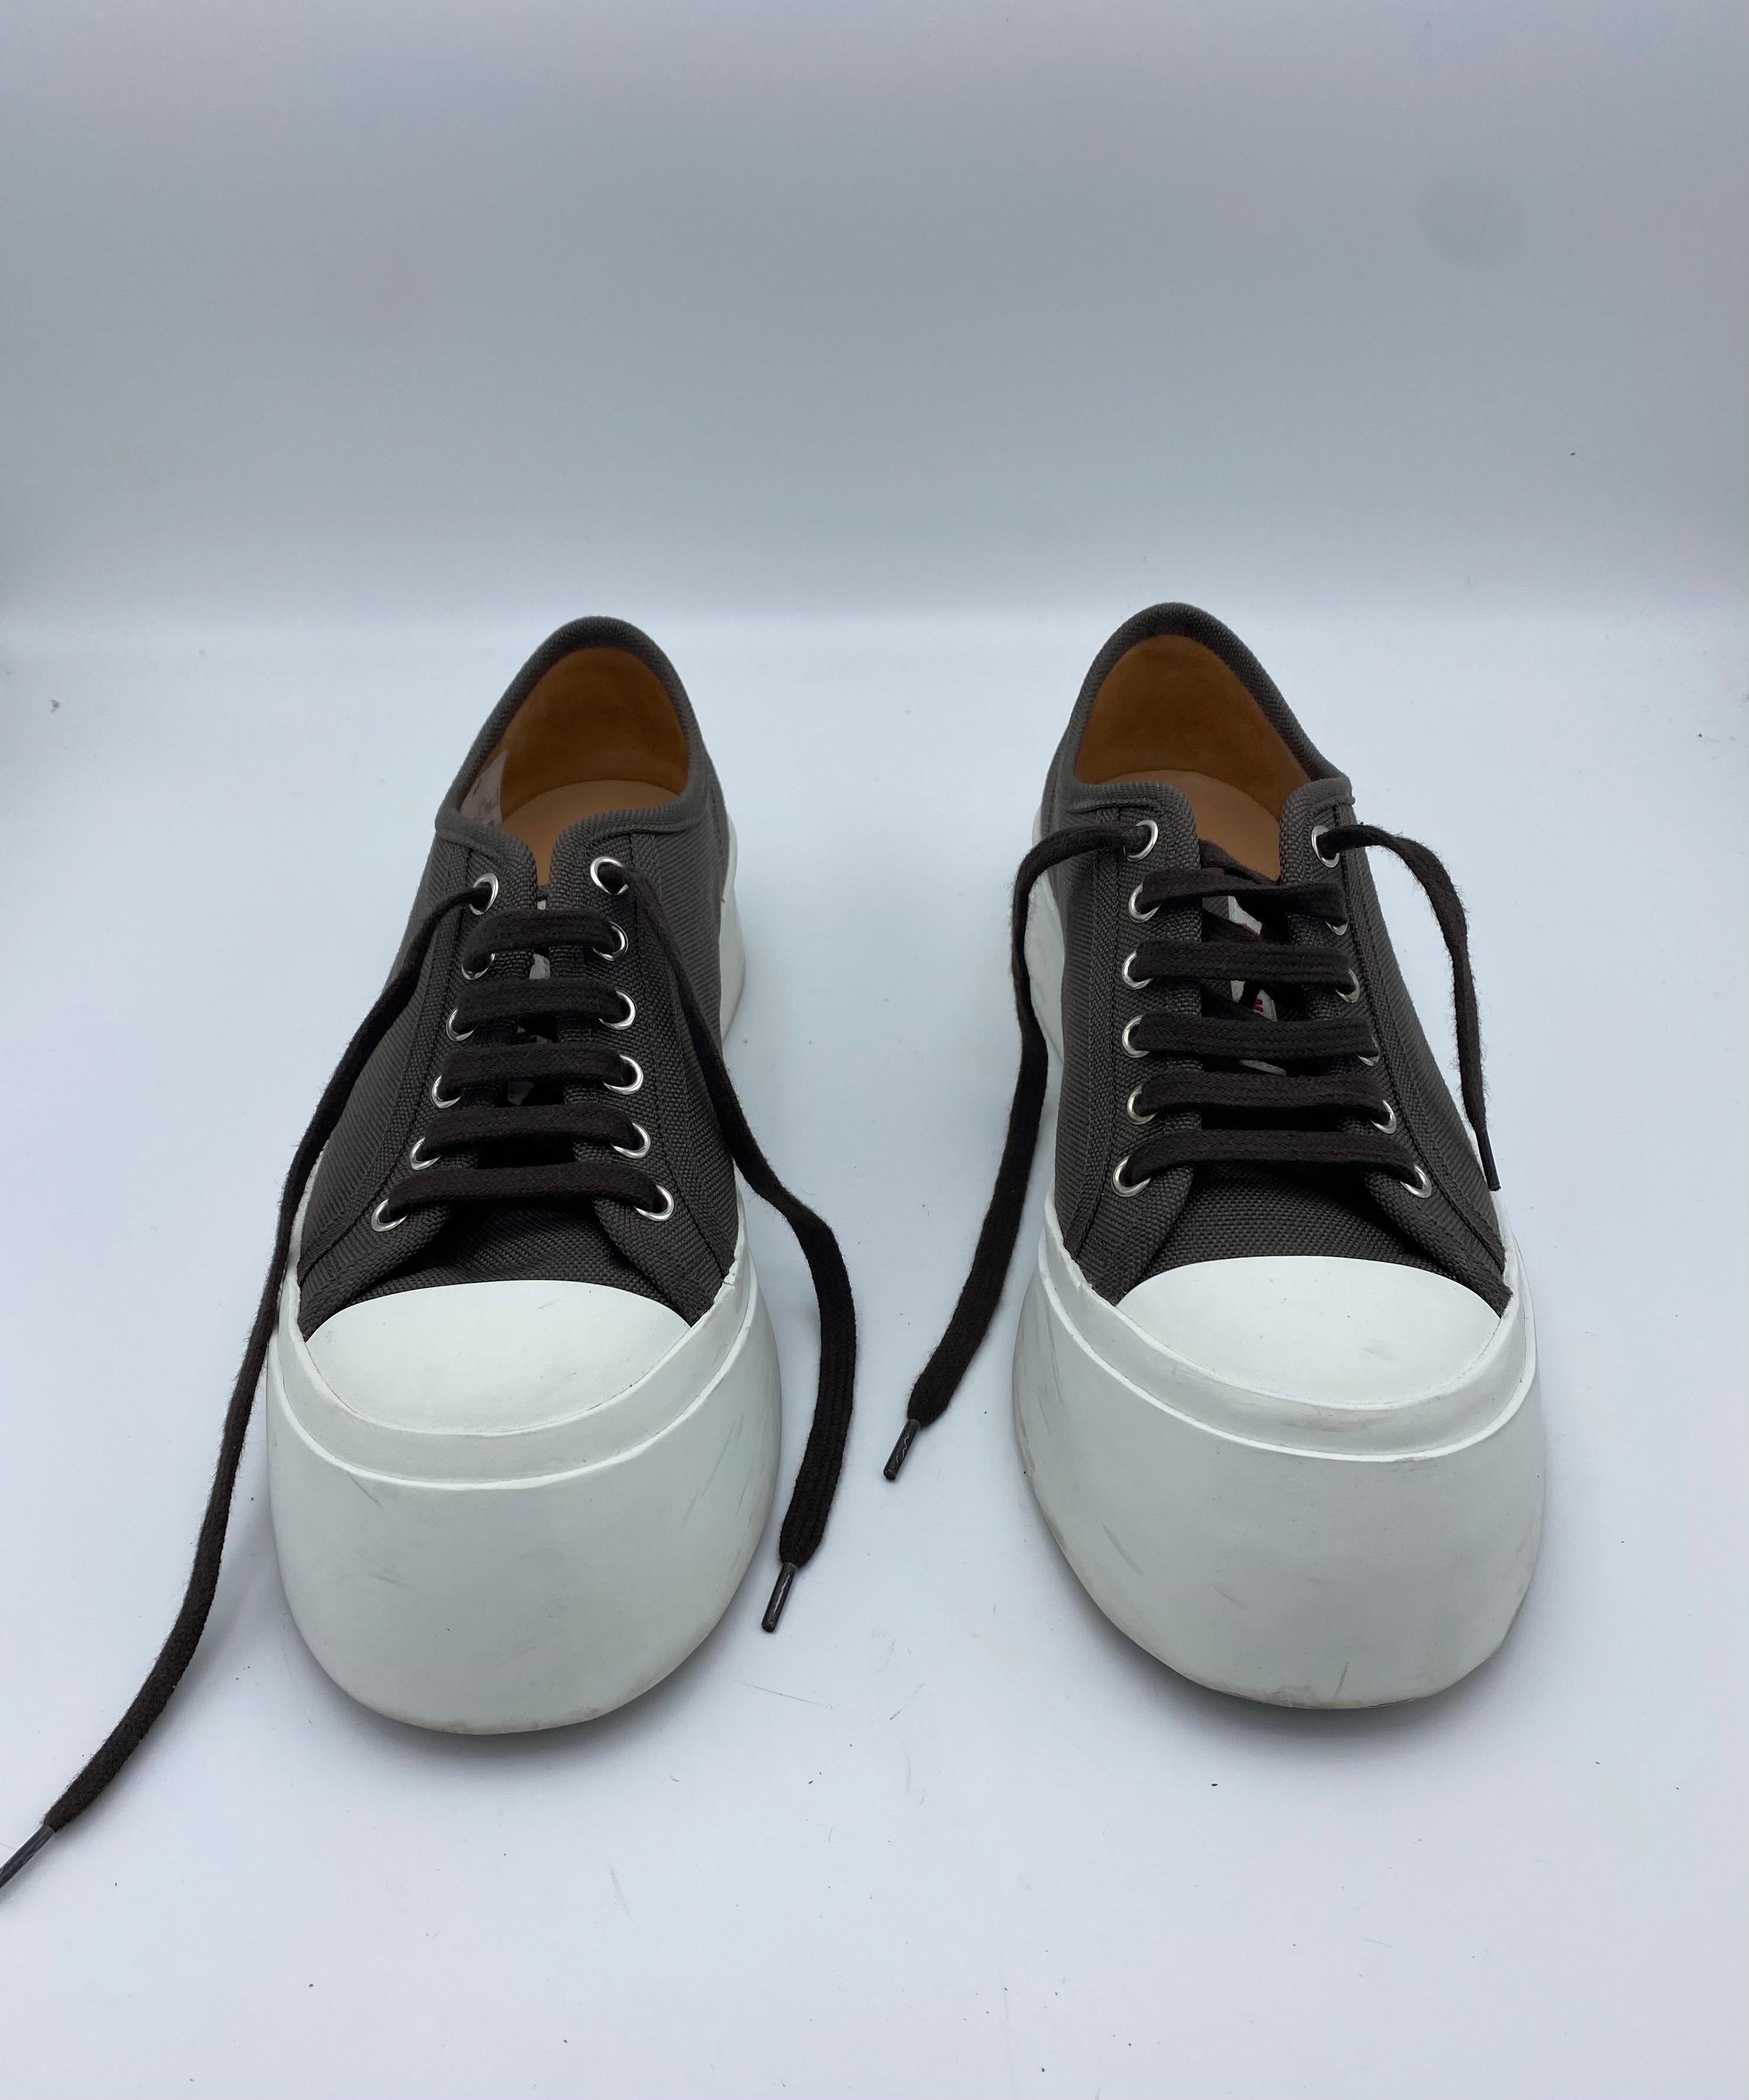 Product details:

The sneakers feature brown canvas with white rubber chunky platform. Heel height is 1 inch.